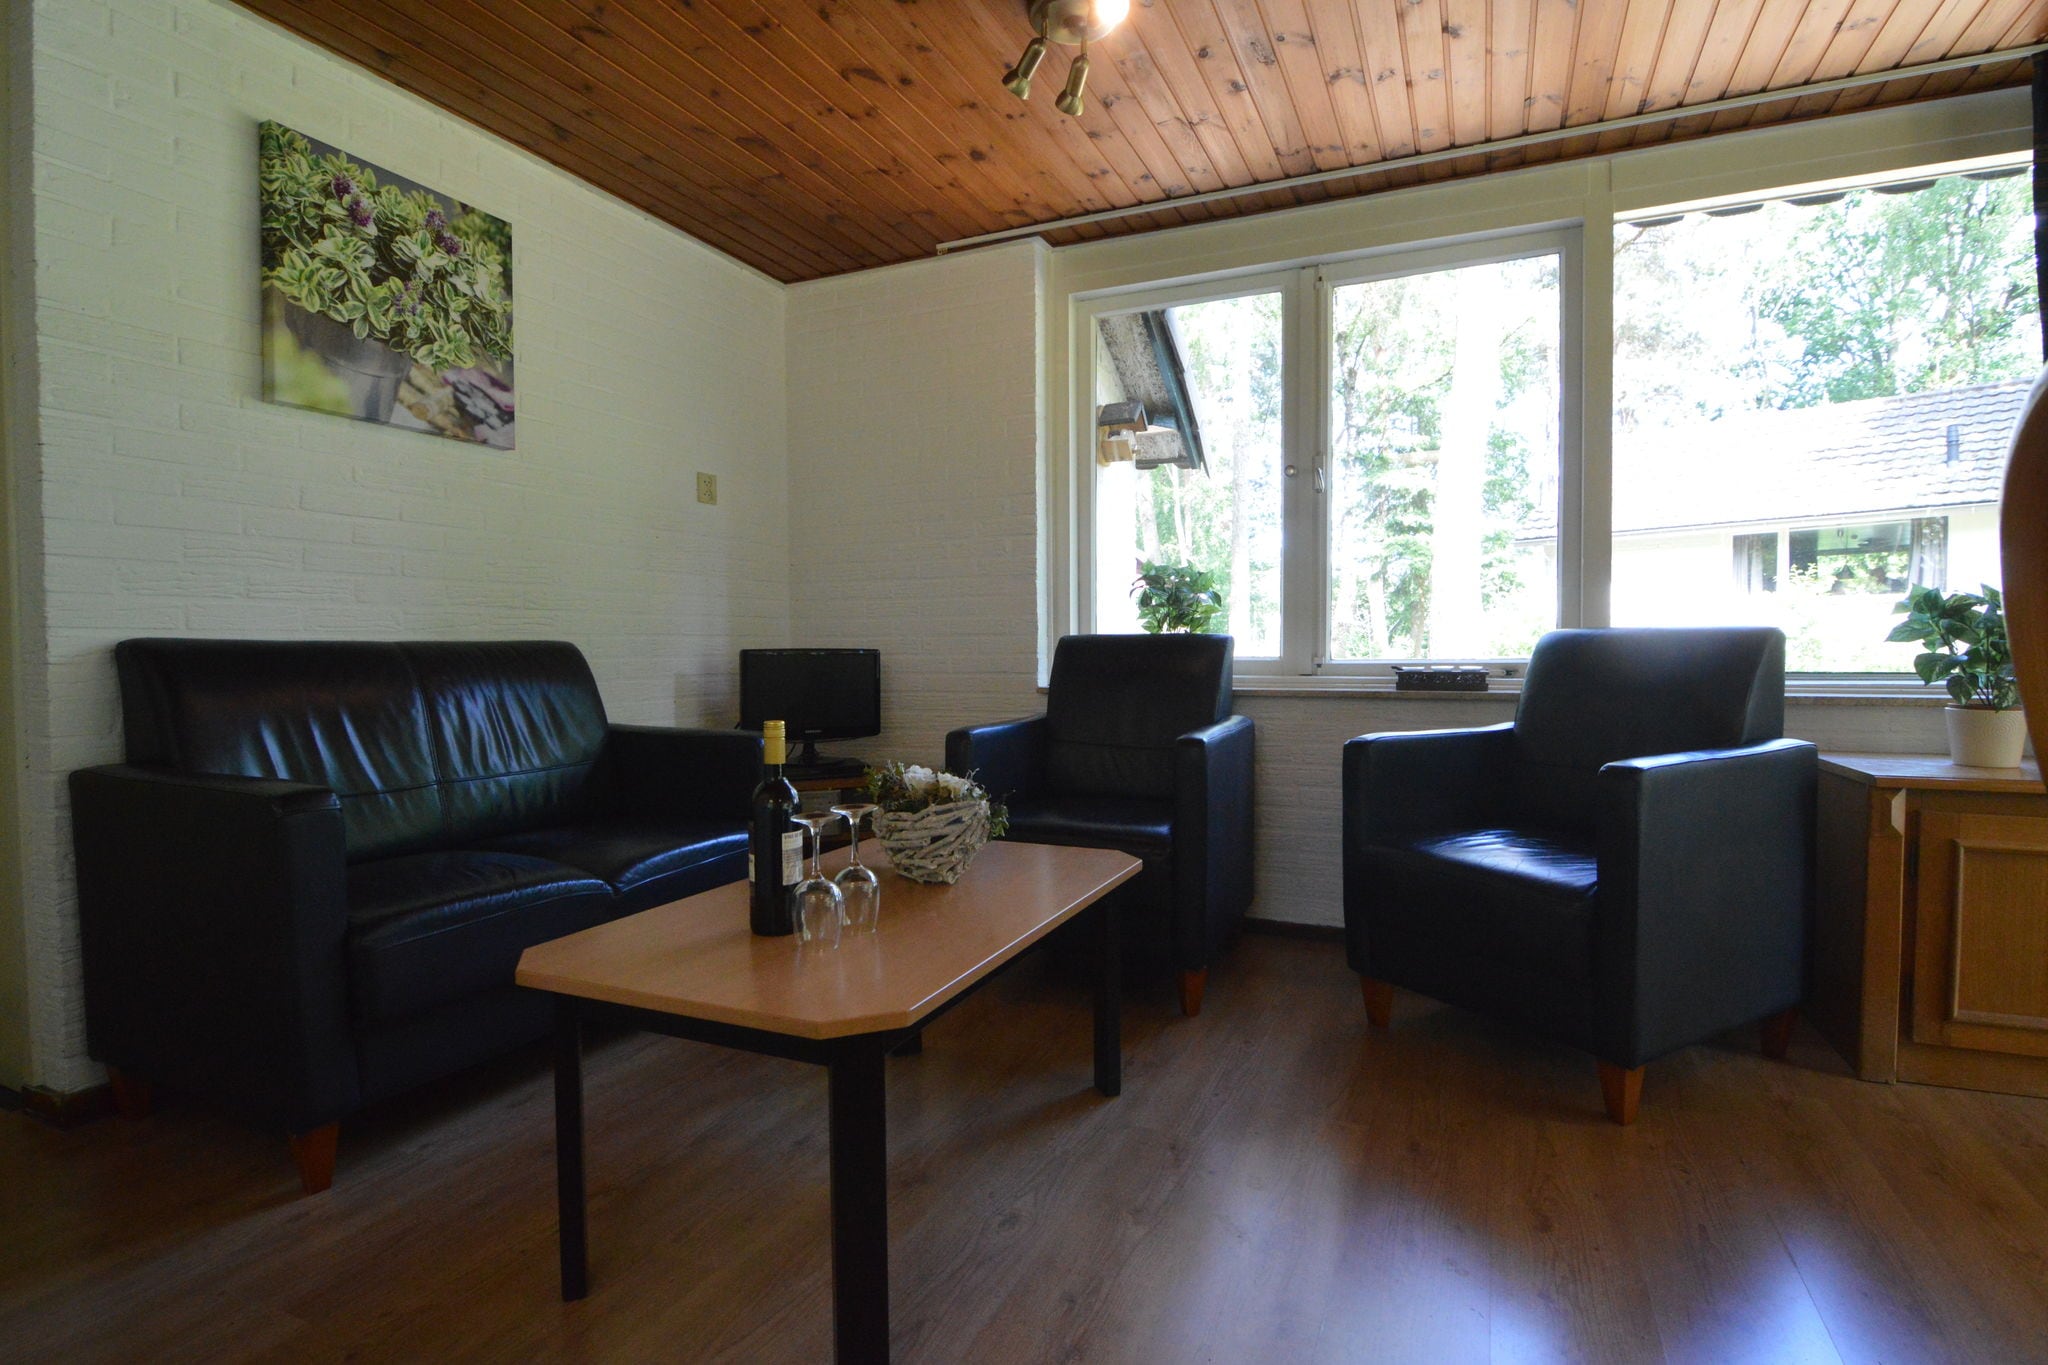 Detached bungalow with lovely covered terrace in a nature rich holiday park